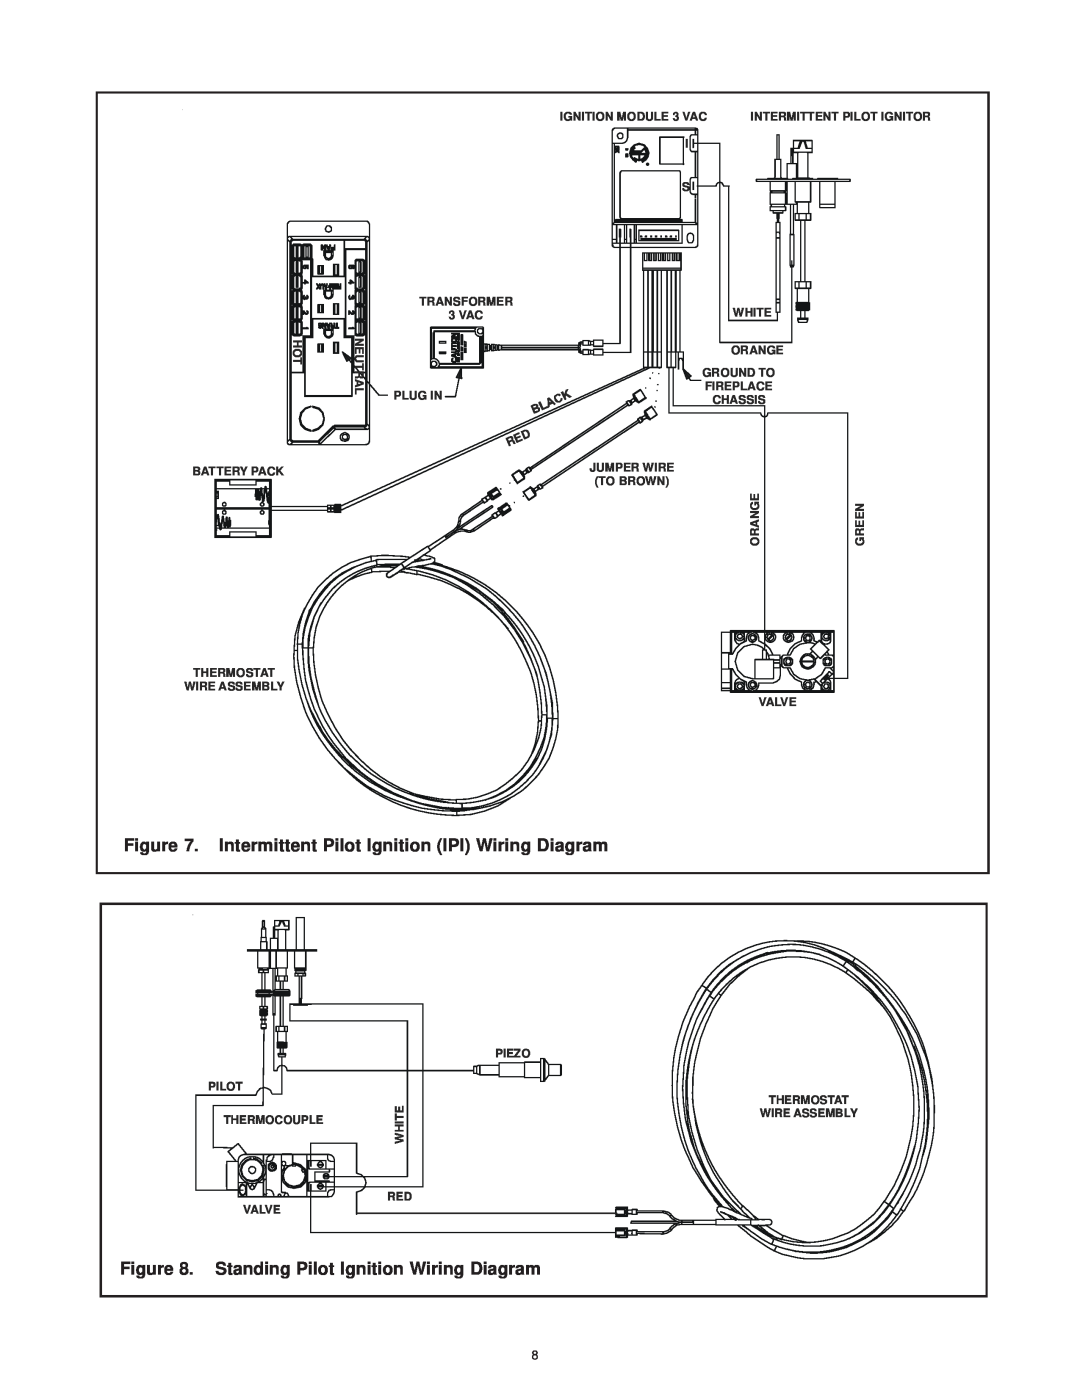 Hearth and Home Technologies SMART-STAT-II operating instructions Intermittent Pilot Ignition IPI Wiring Diagram 